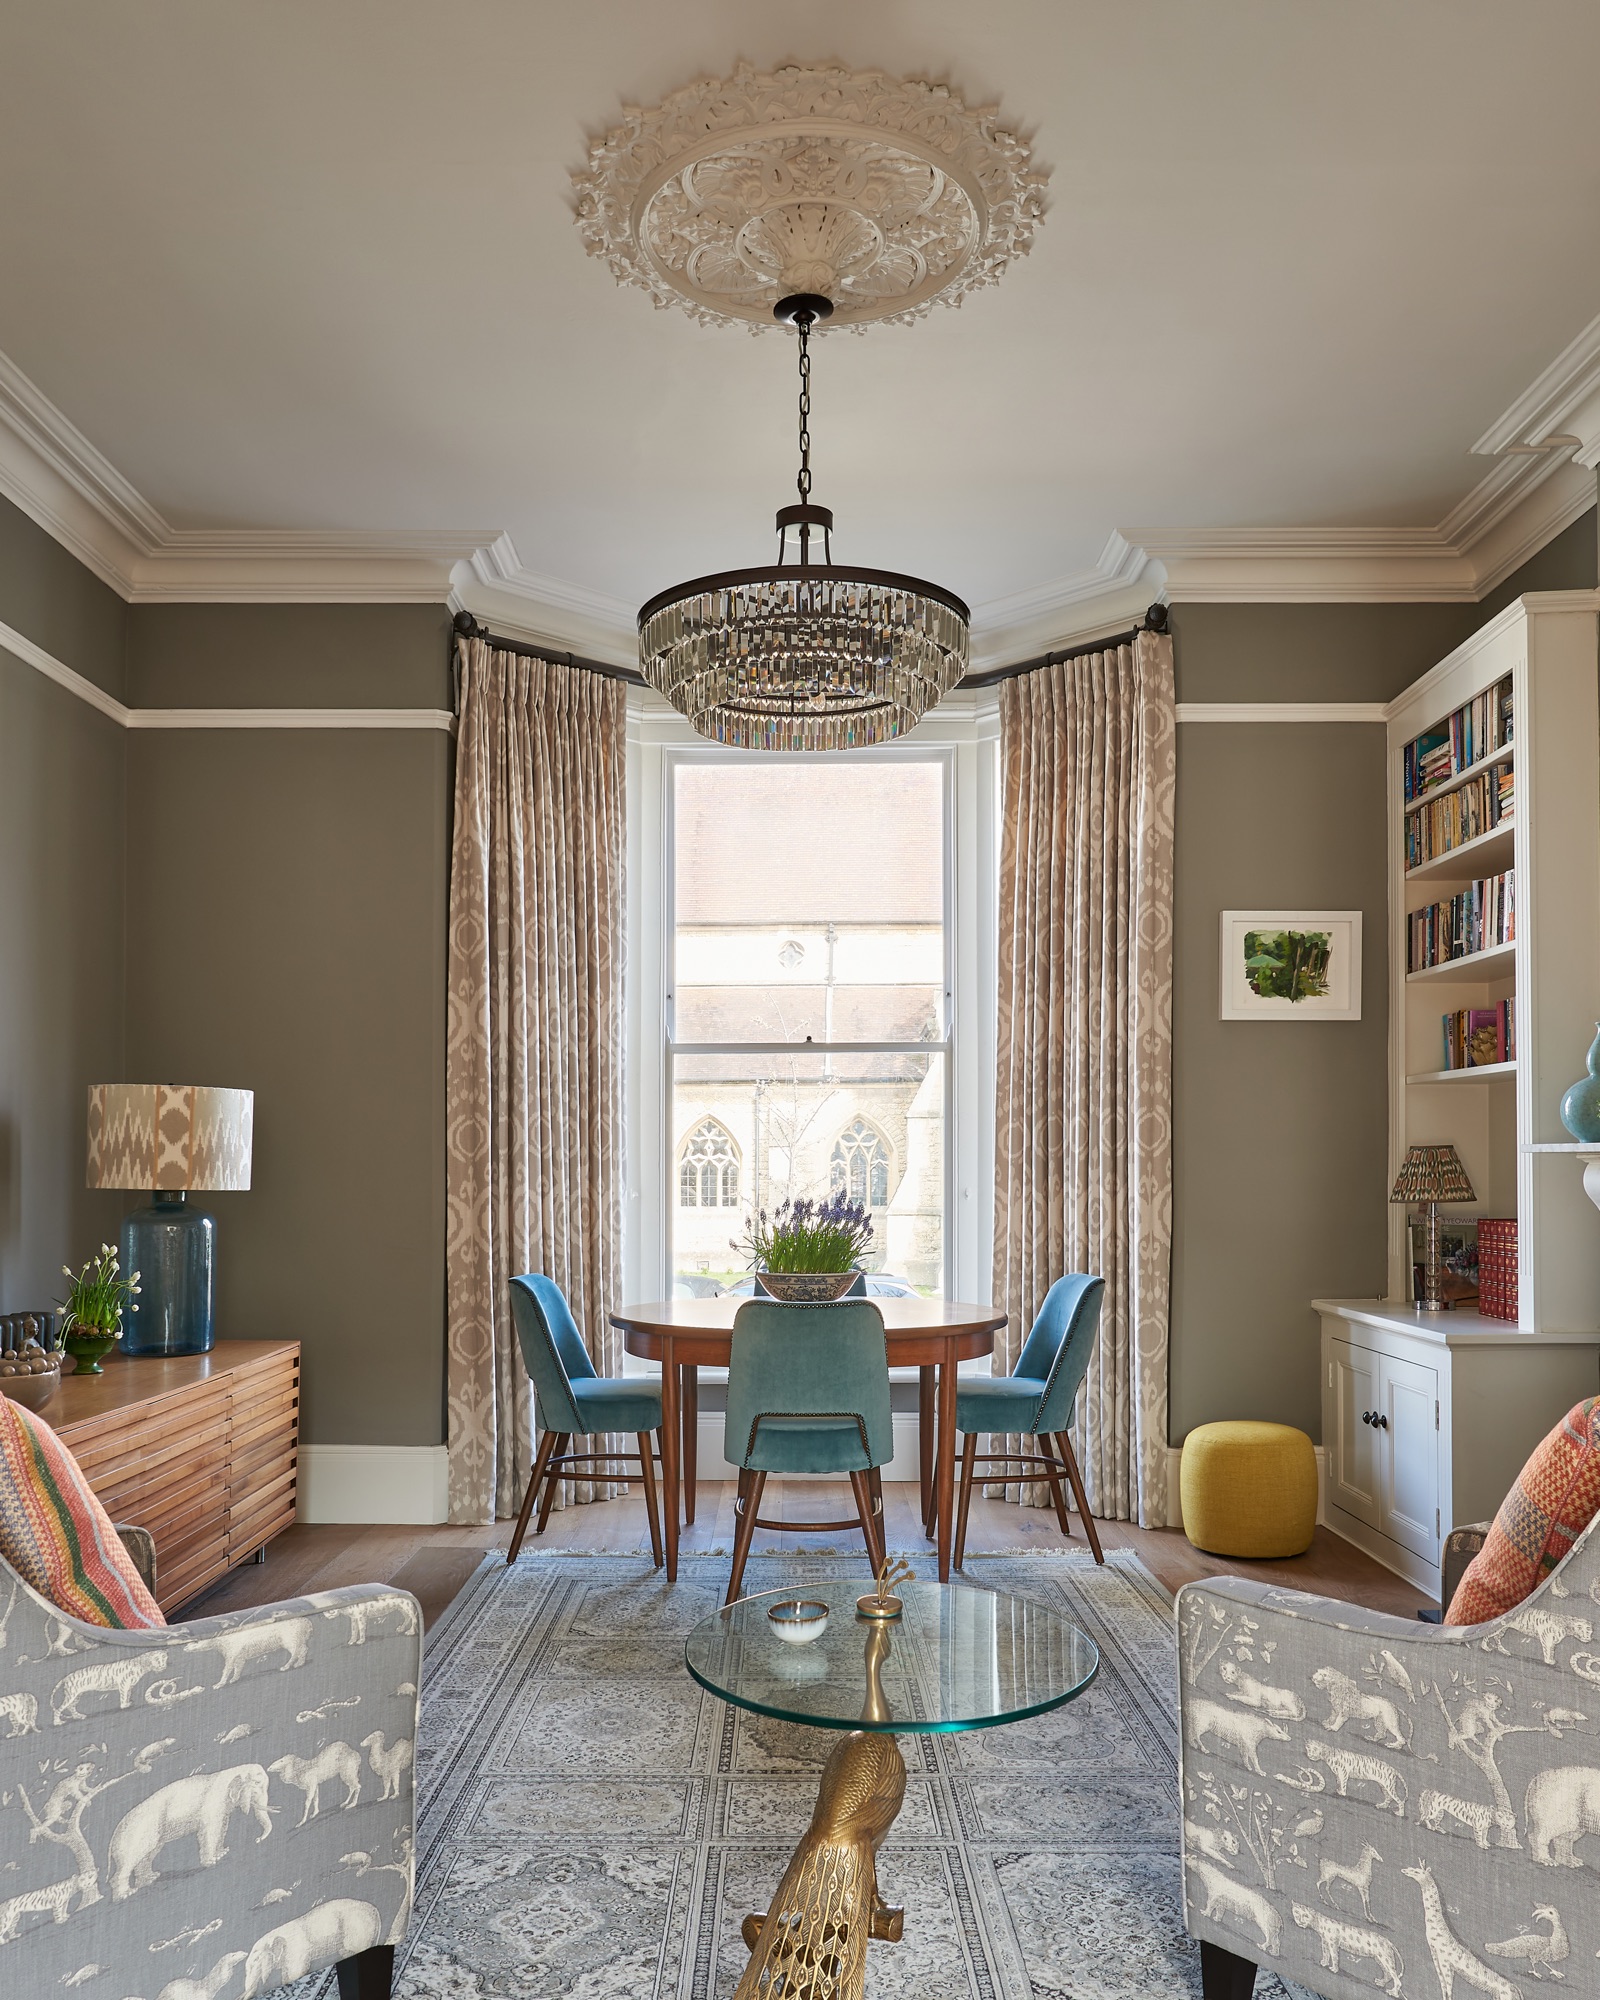 Beautiful Georgian town house painted in worsted farrow and ball, with styled book shelves and  Andrew Martin upholstered armchairs and cushions. Vintage dining table with bespoke dining chairs. Full length Andrew Martin curtains.